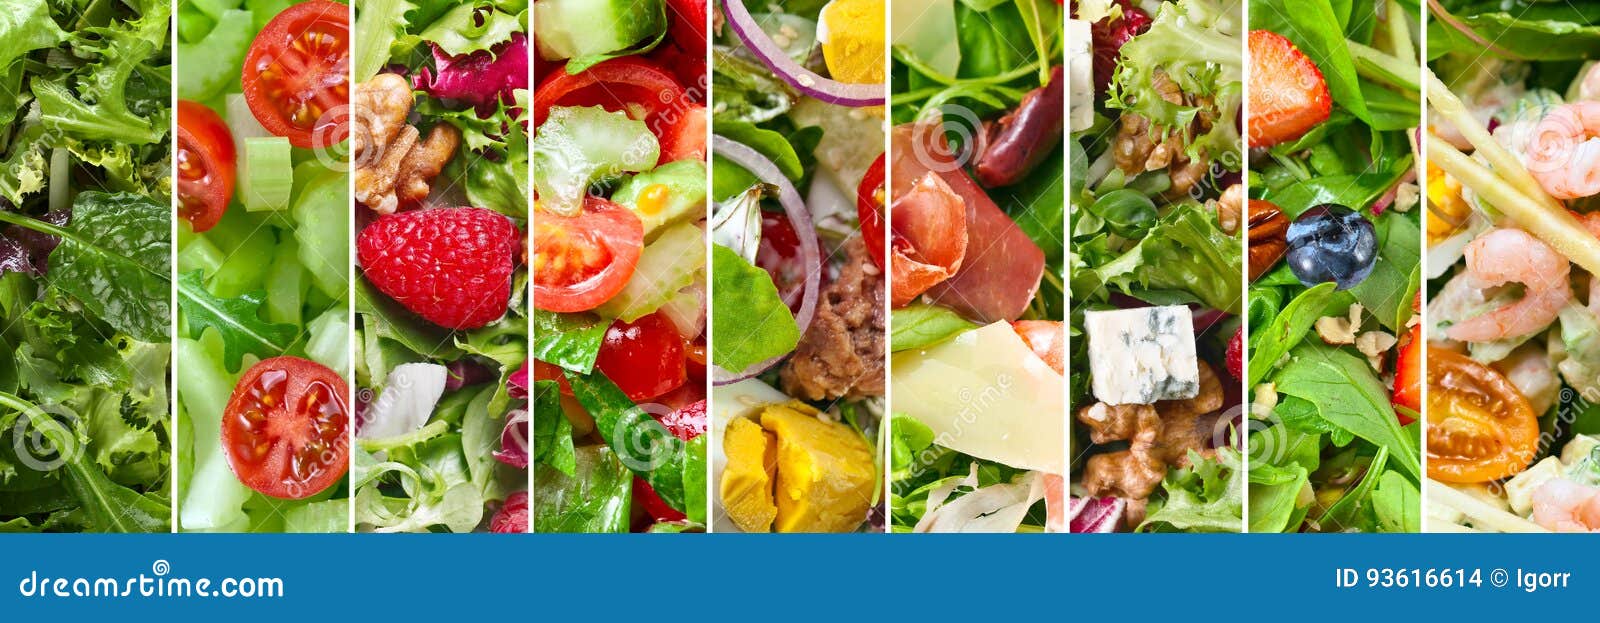 collage of different salads.